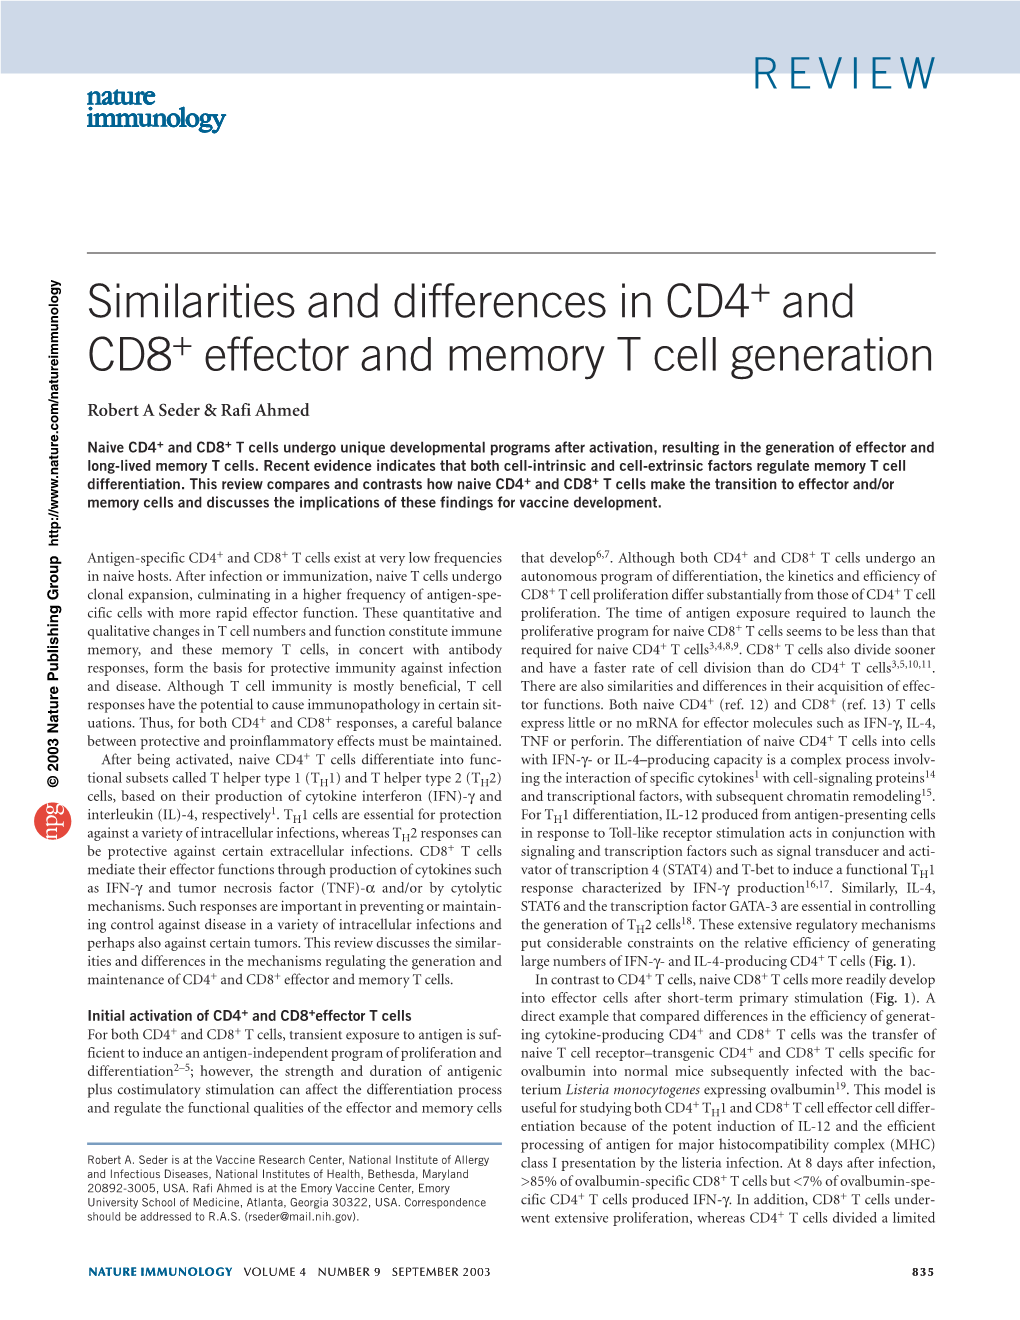 Similarities and Differences in CD4 and CD8 Effector and Memory T Cell Generation